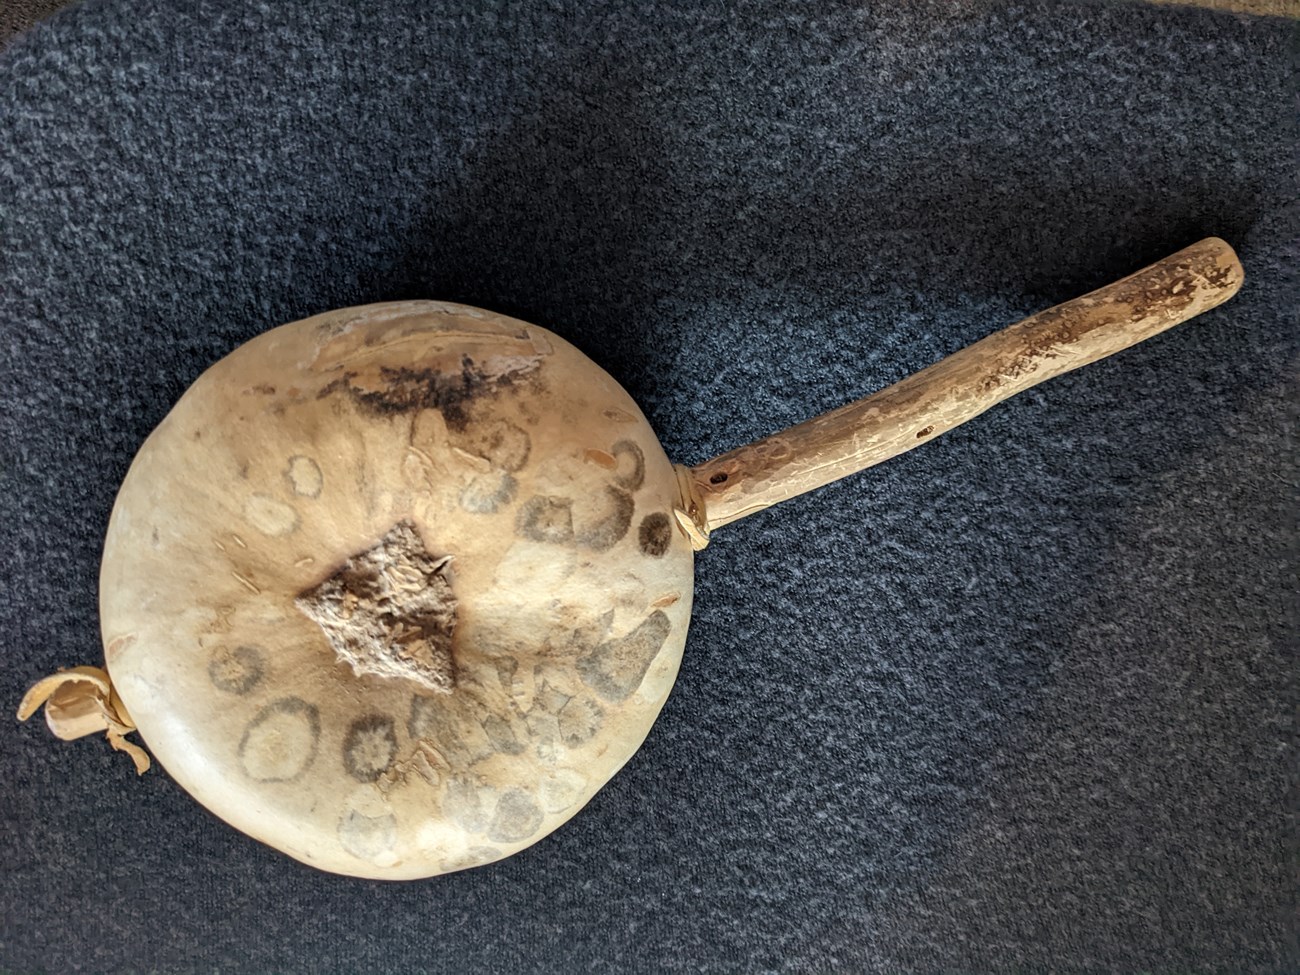 A replica of a gourd rattle like those found at Aztec Ruins.